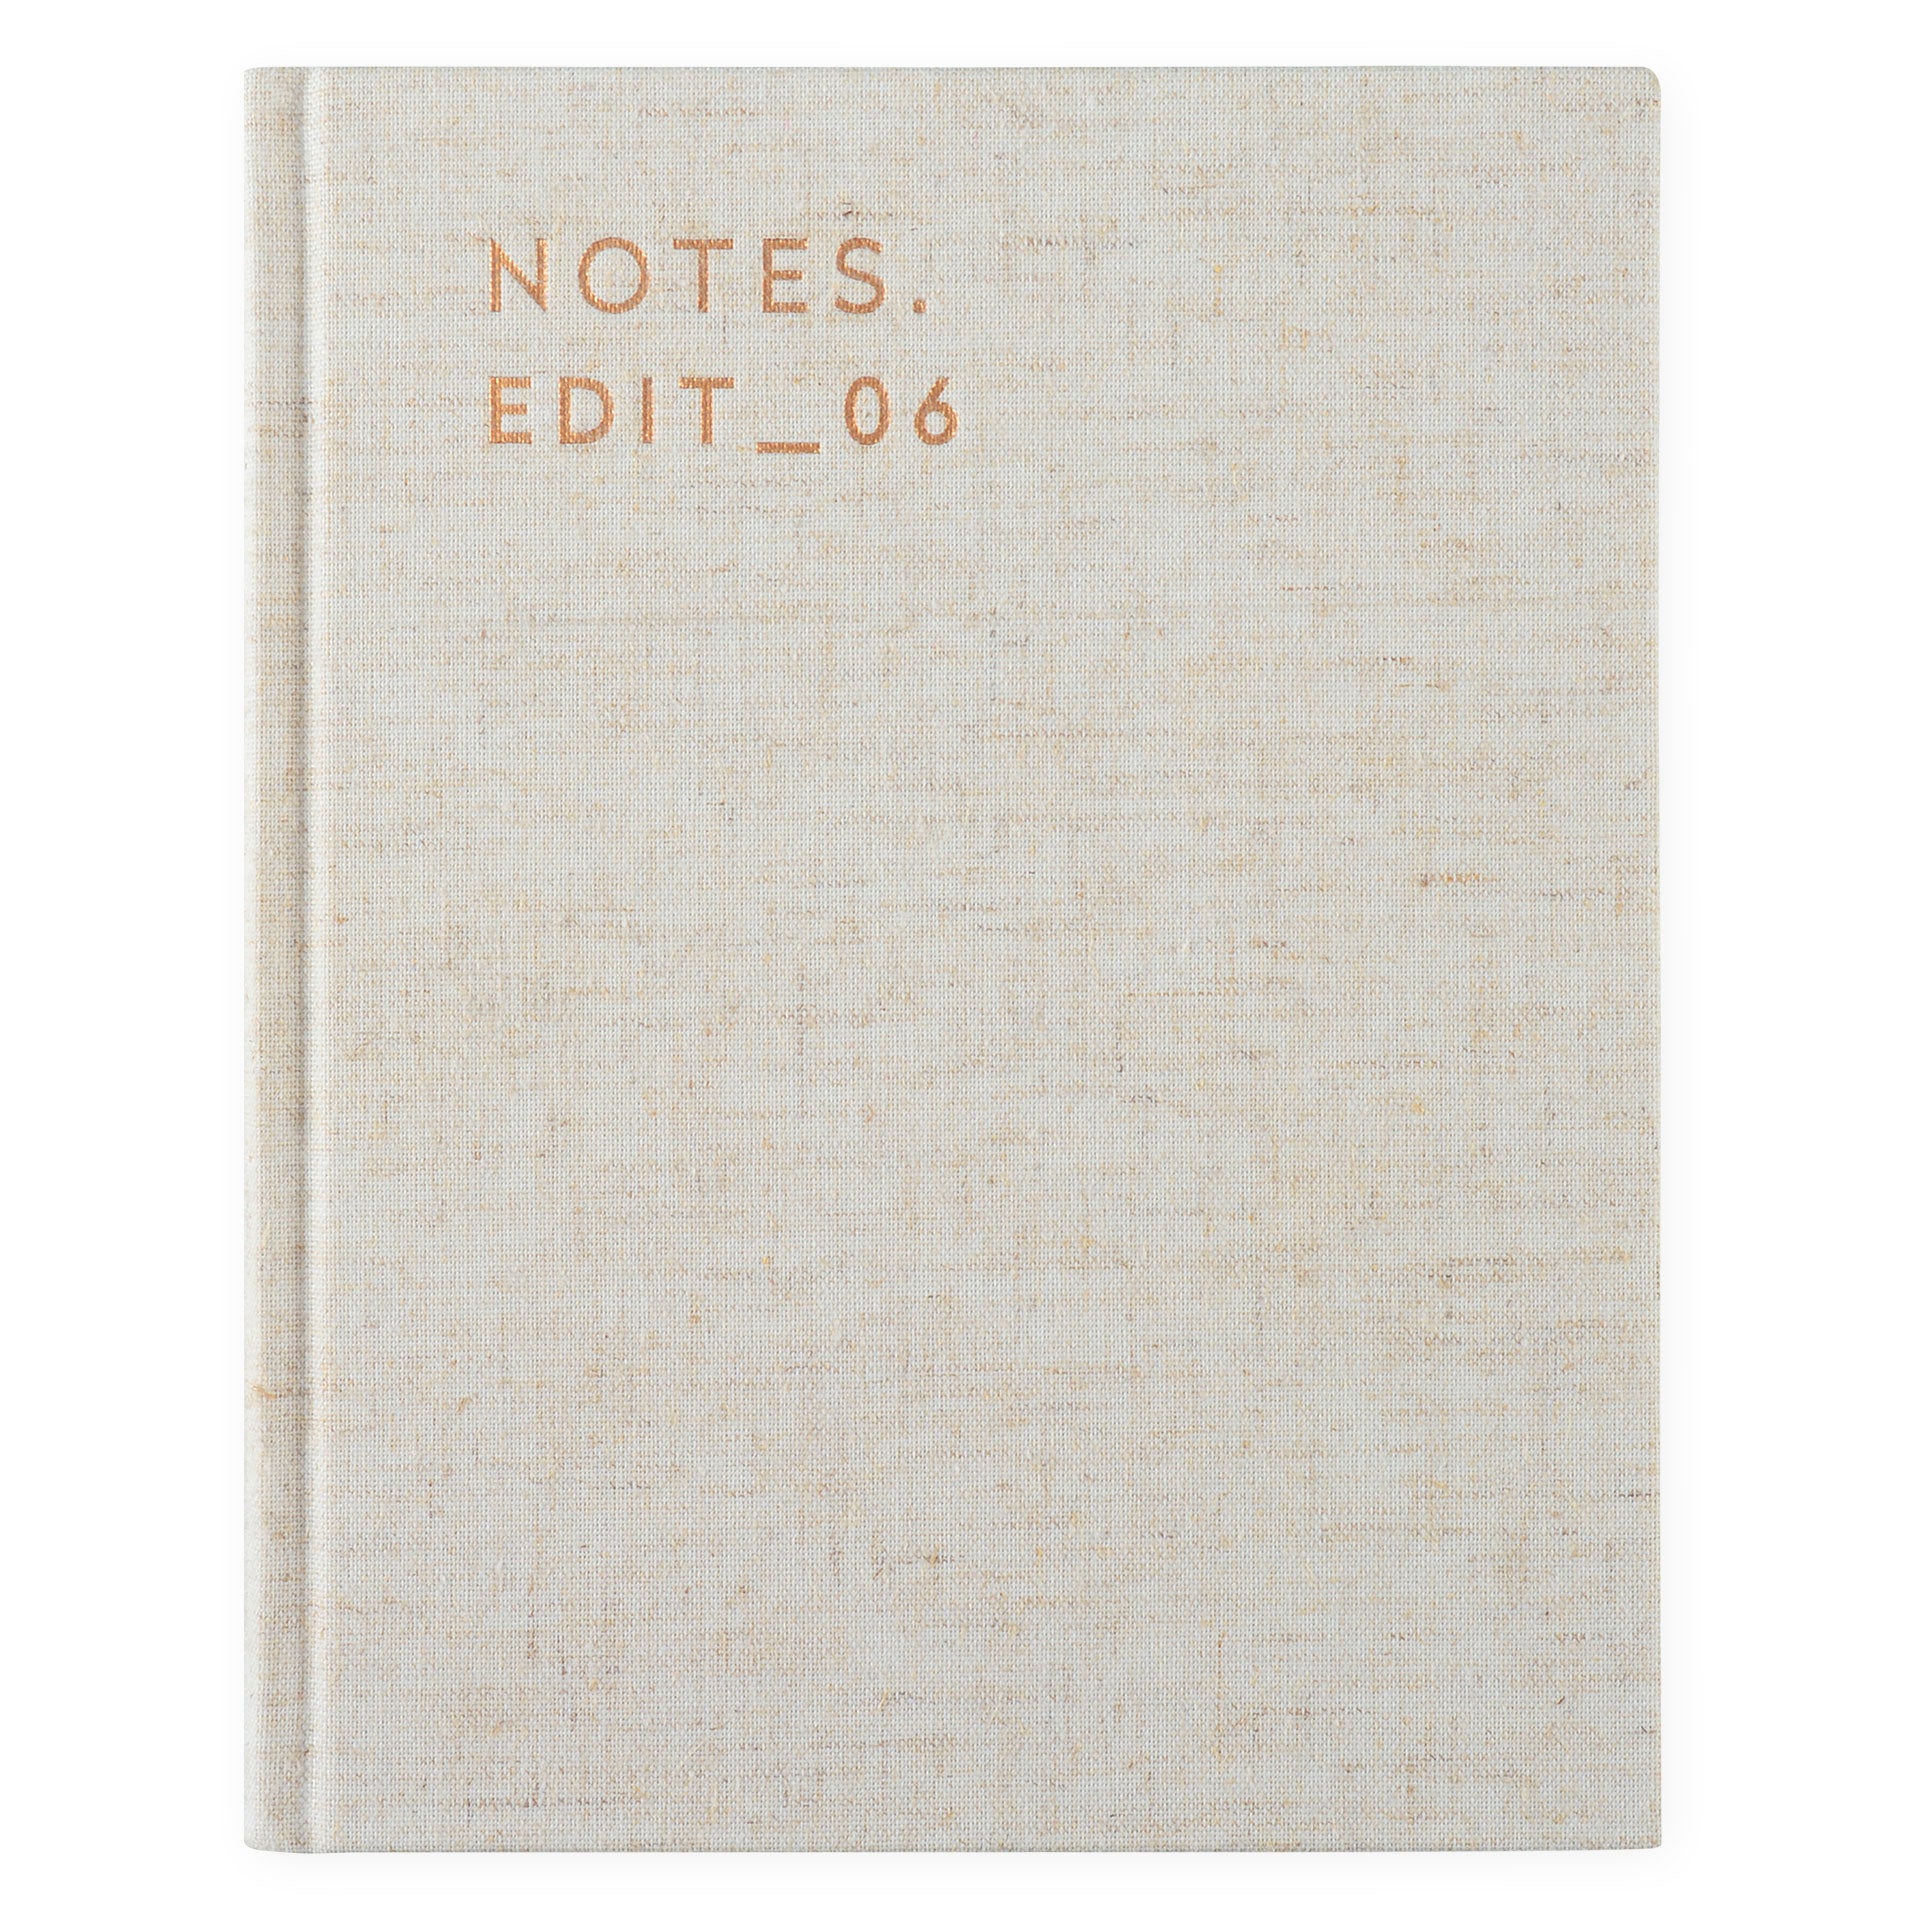 Darling Clementine Darling Clementine Notebook Sand Linen Lined 